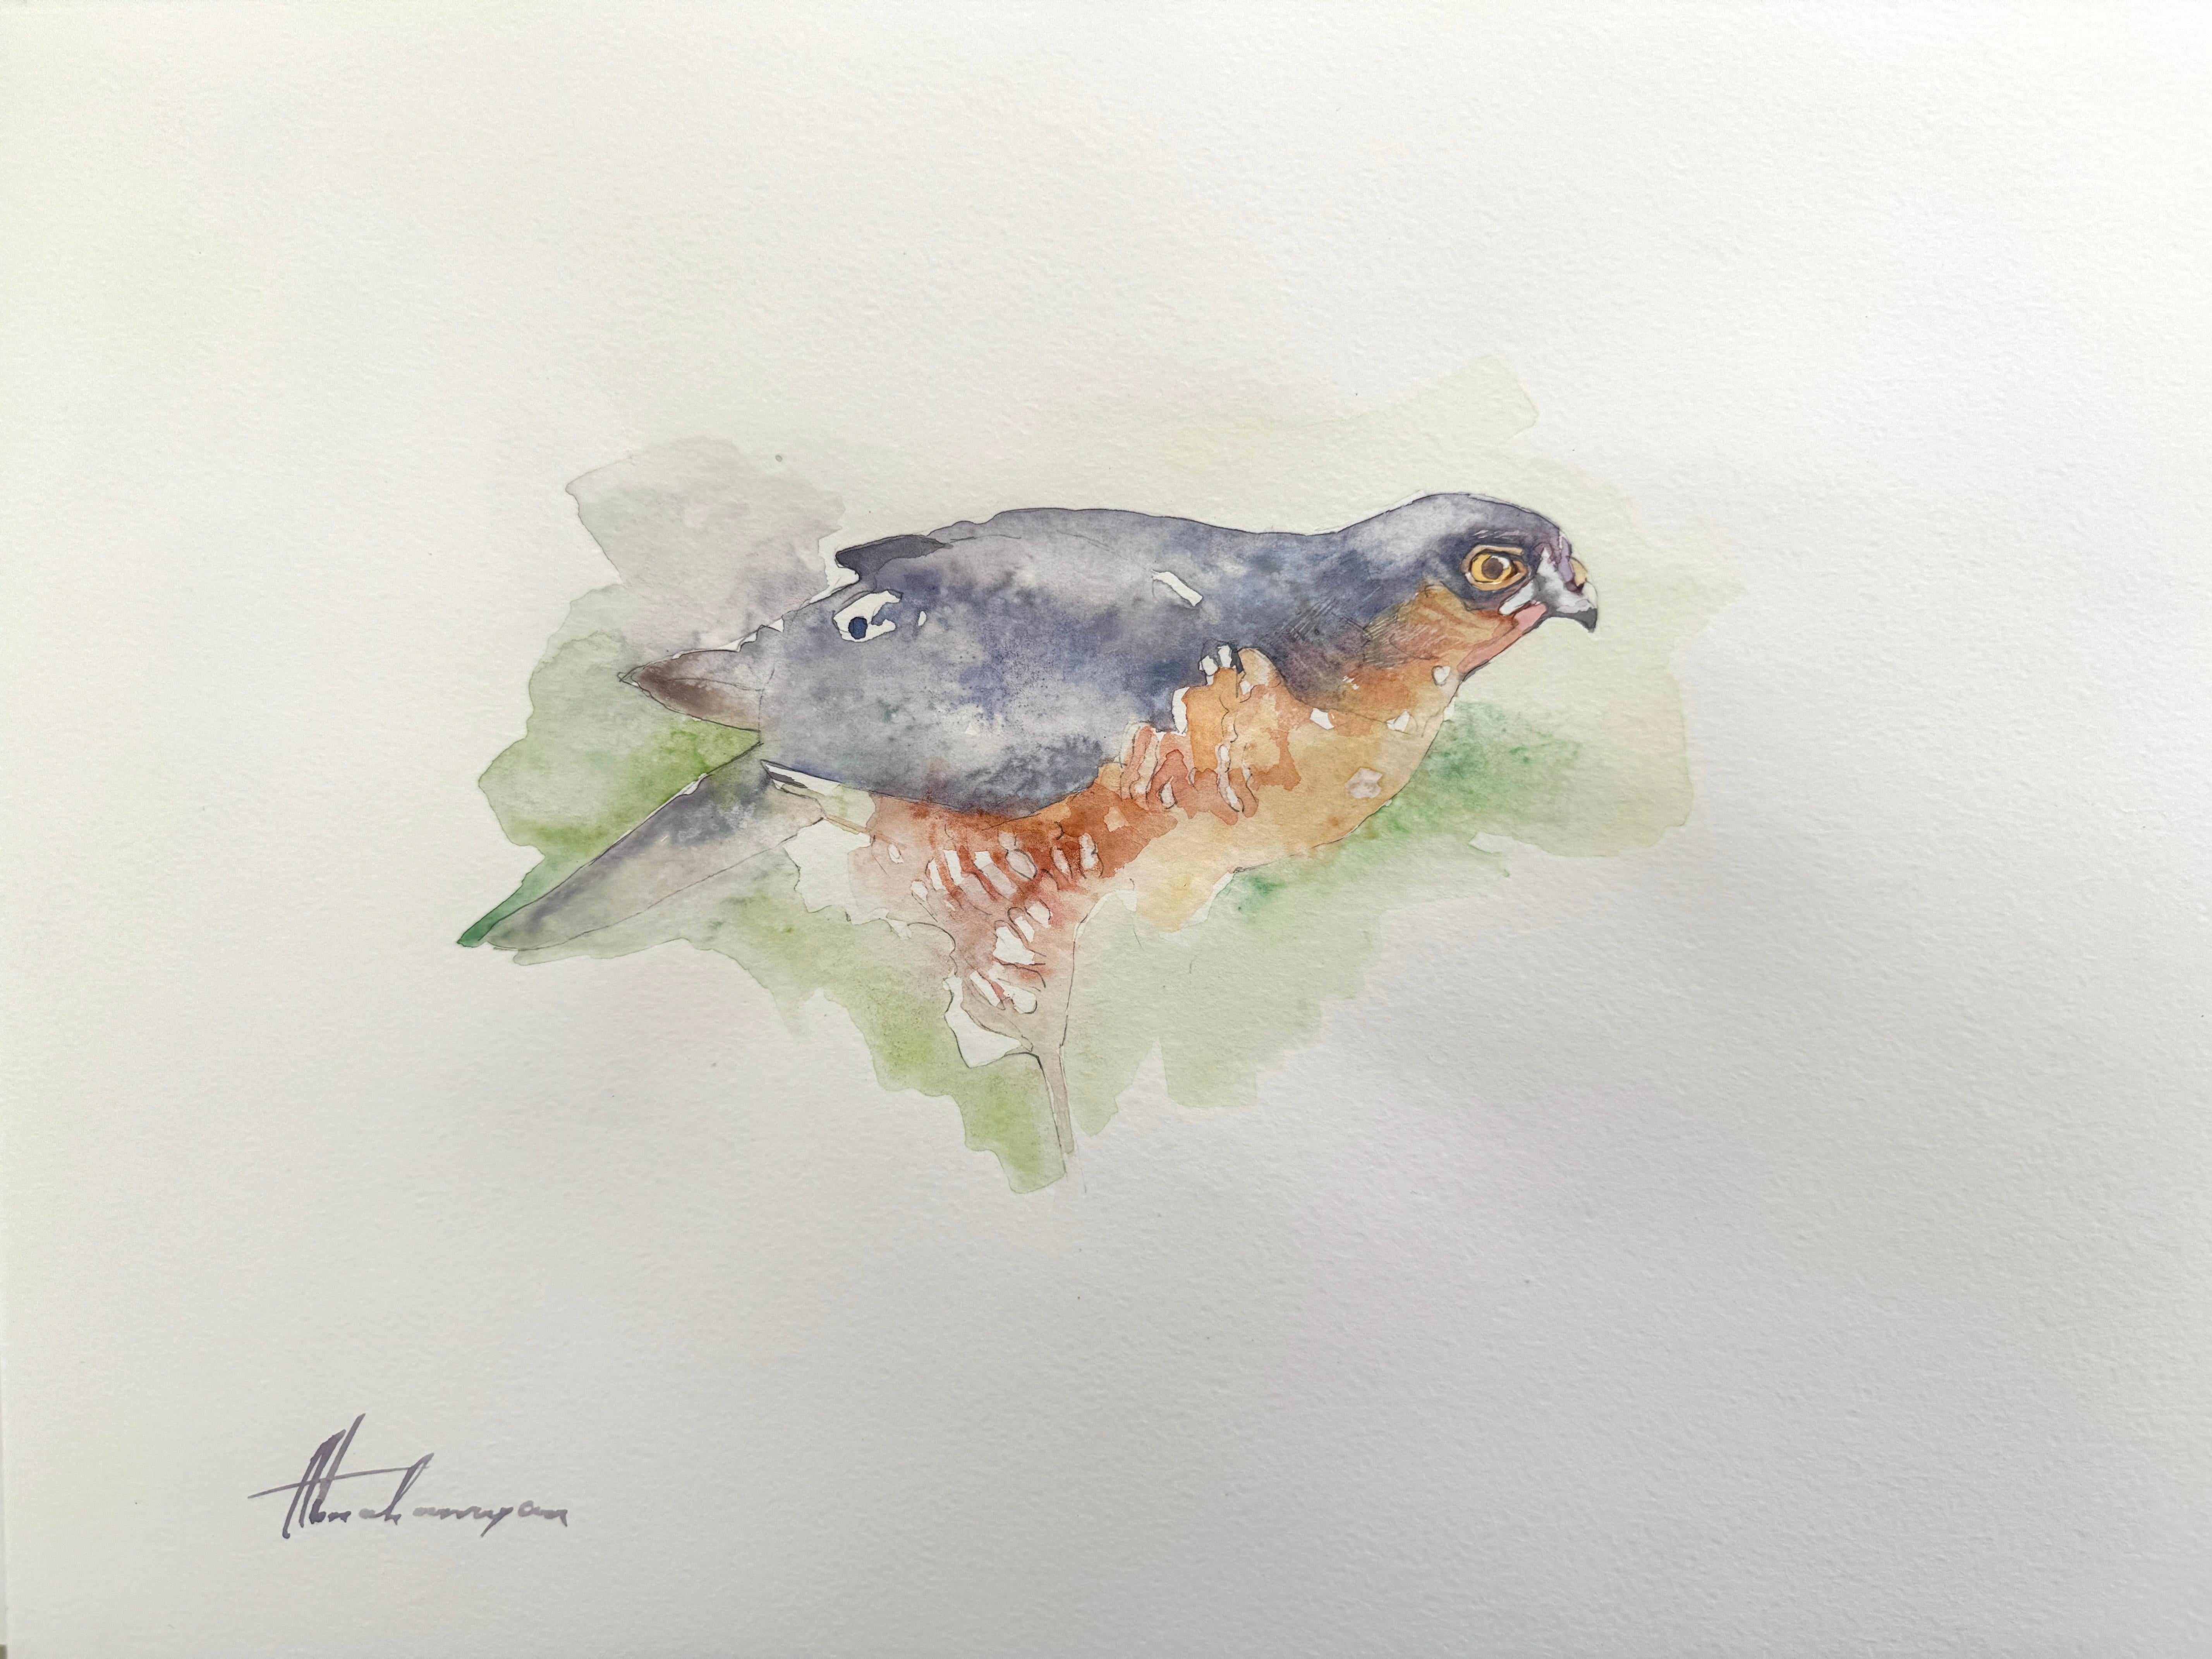 Artyom Abrahamyan Animal Art - Sparrow-hawk, Bird, Watercolor on Paper, Handmade Painting, One of a Kind